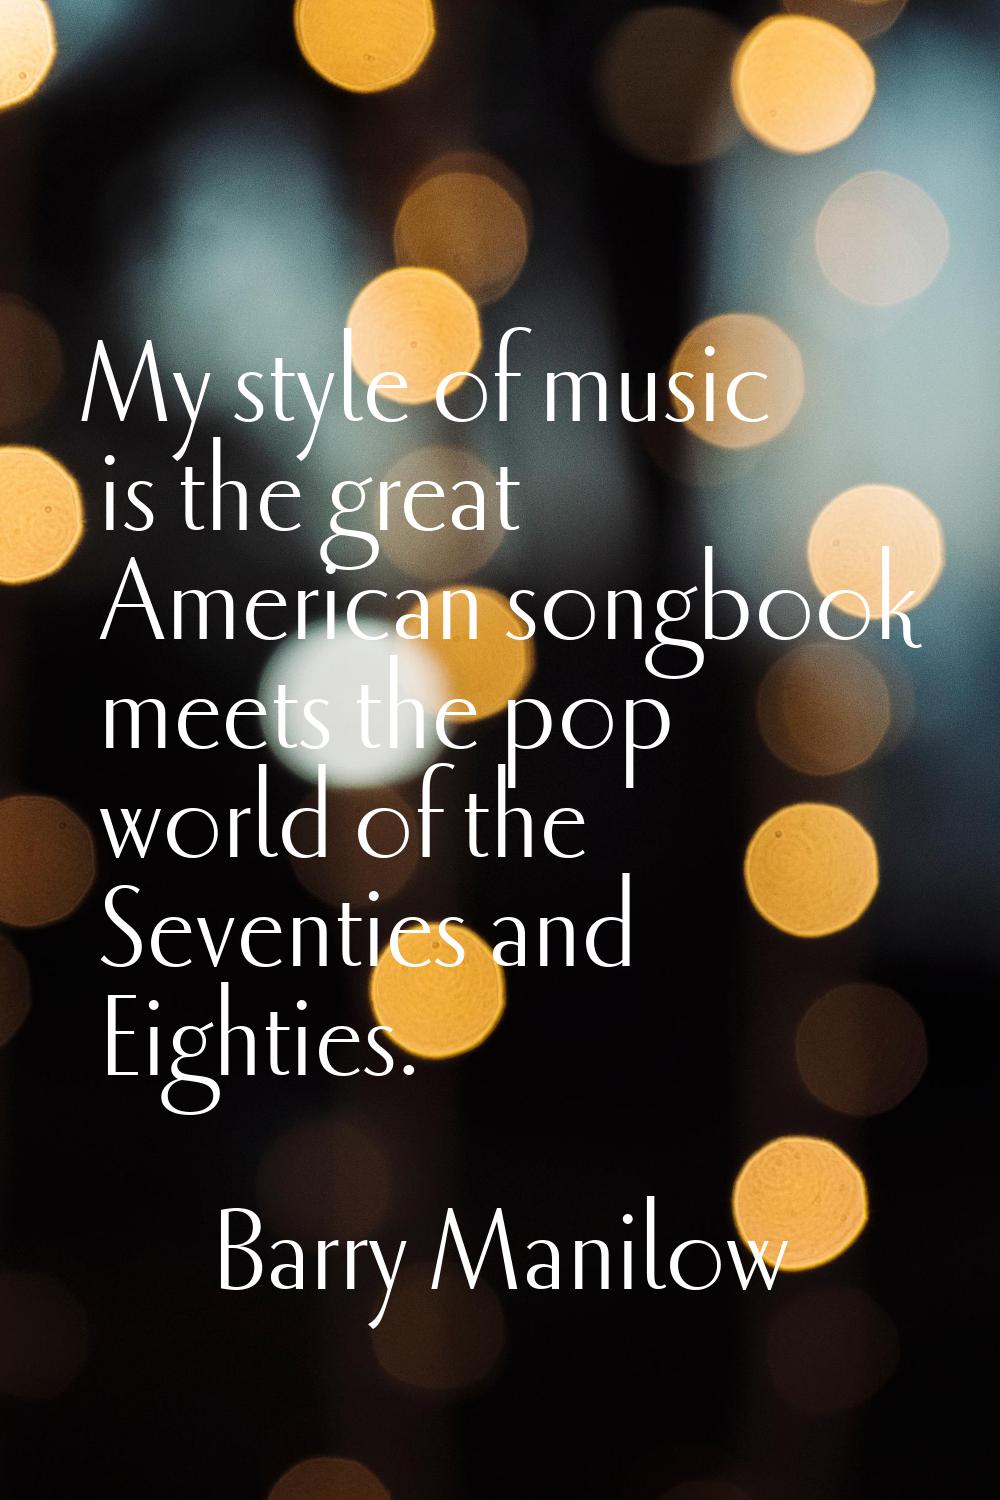 My style of music is the great American songbook meets the pop world of the Seventies and Eighties.